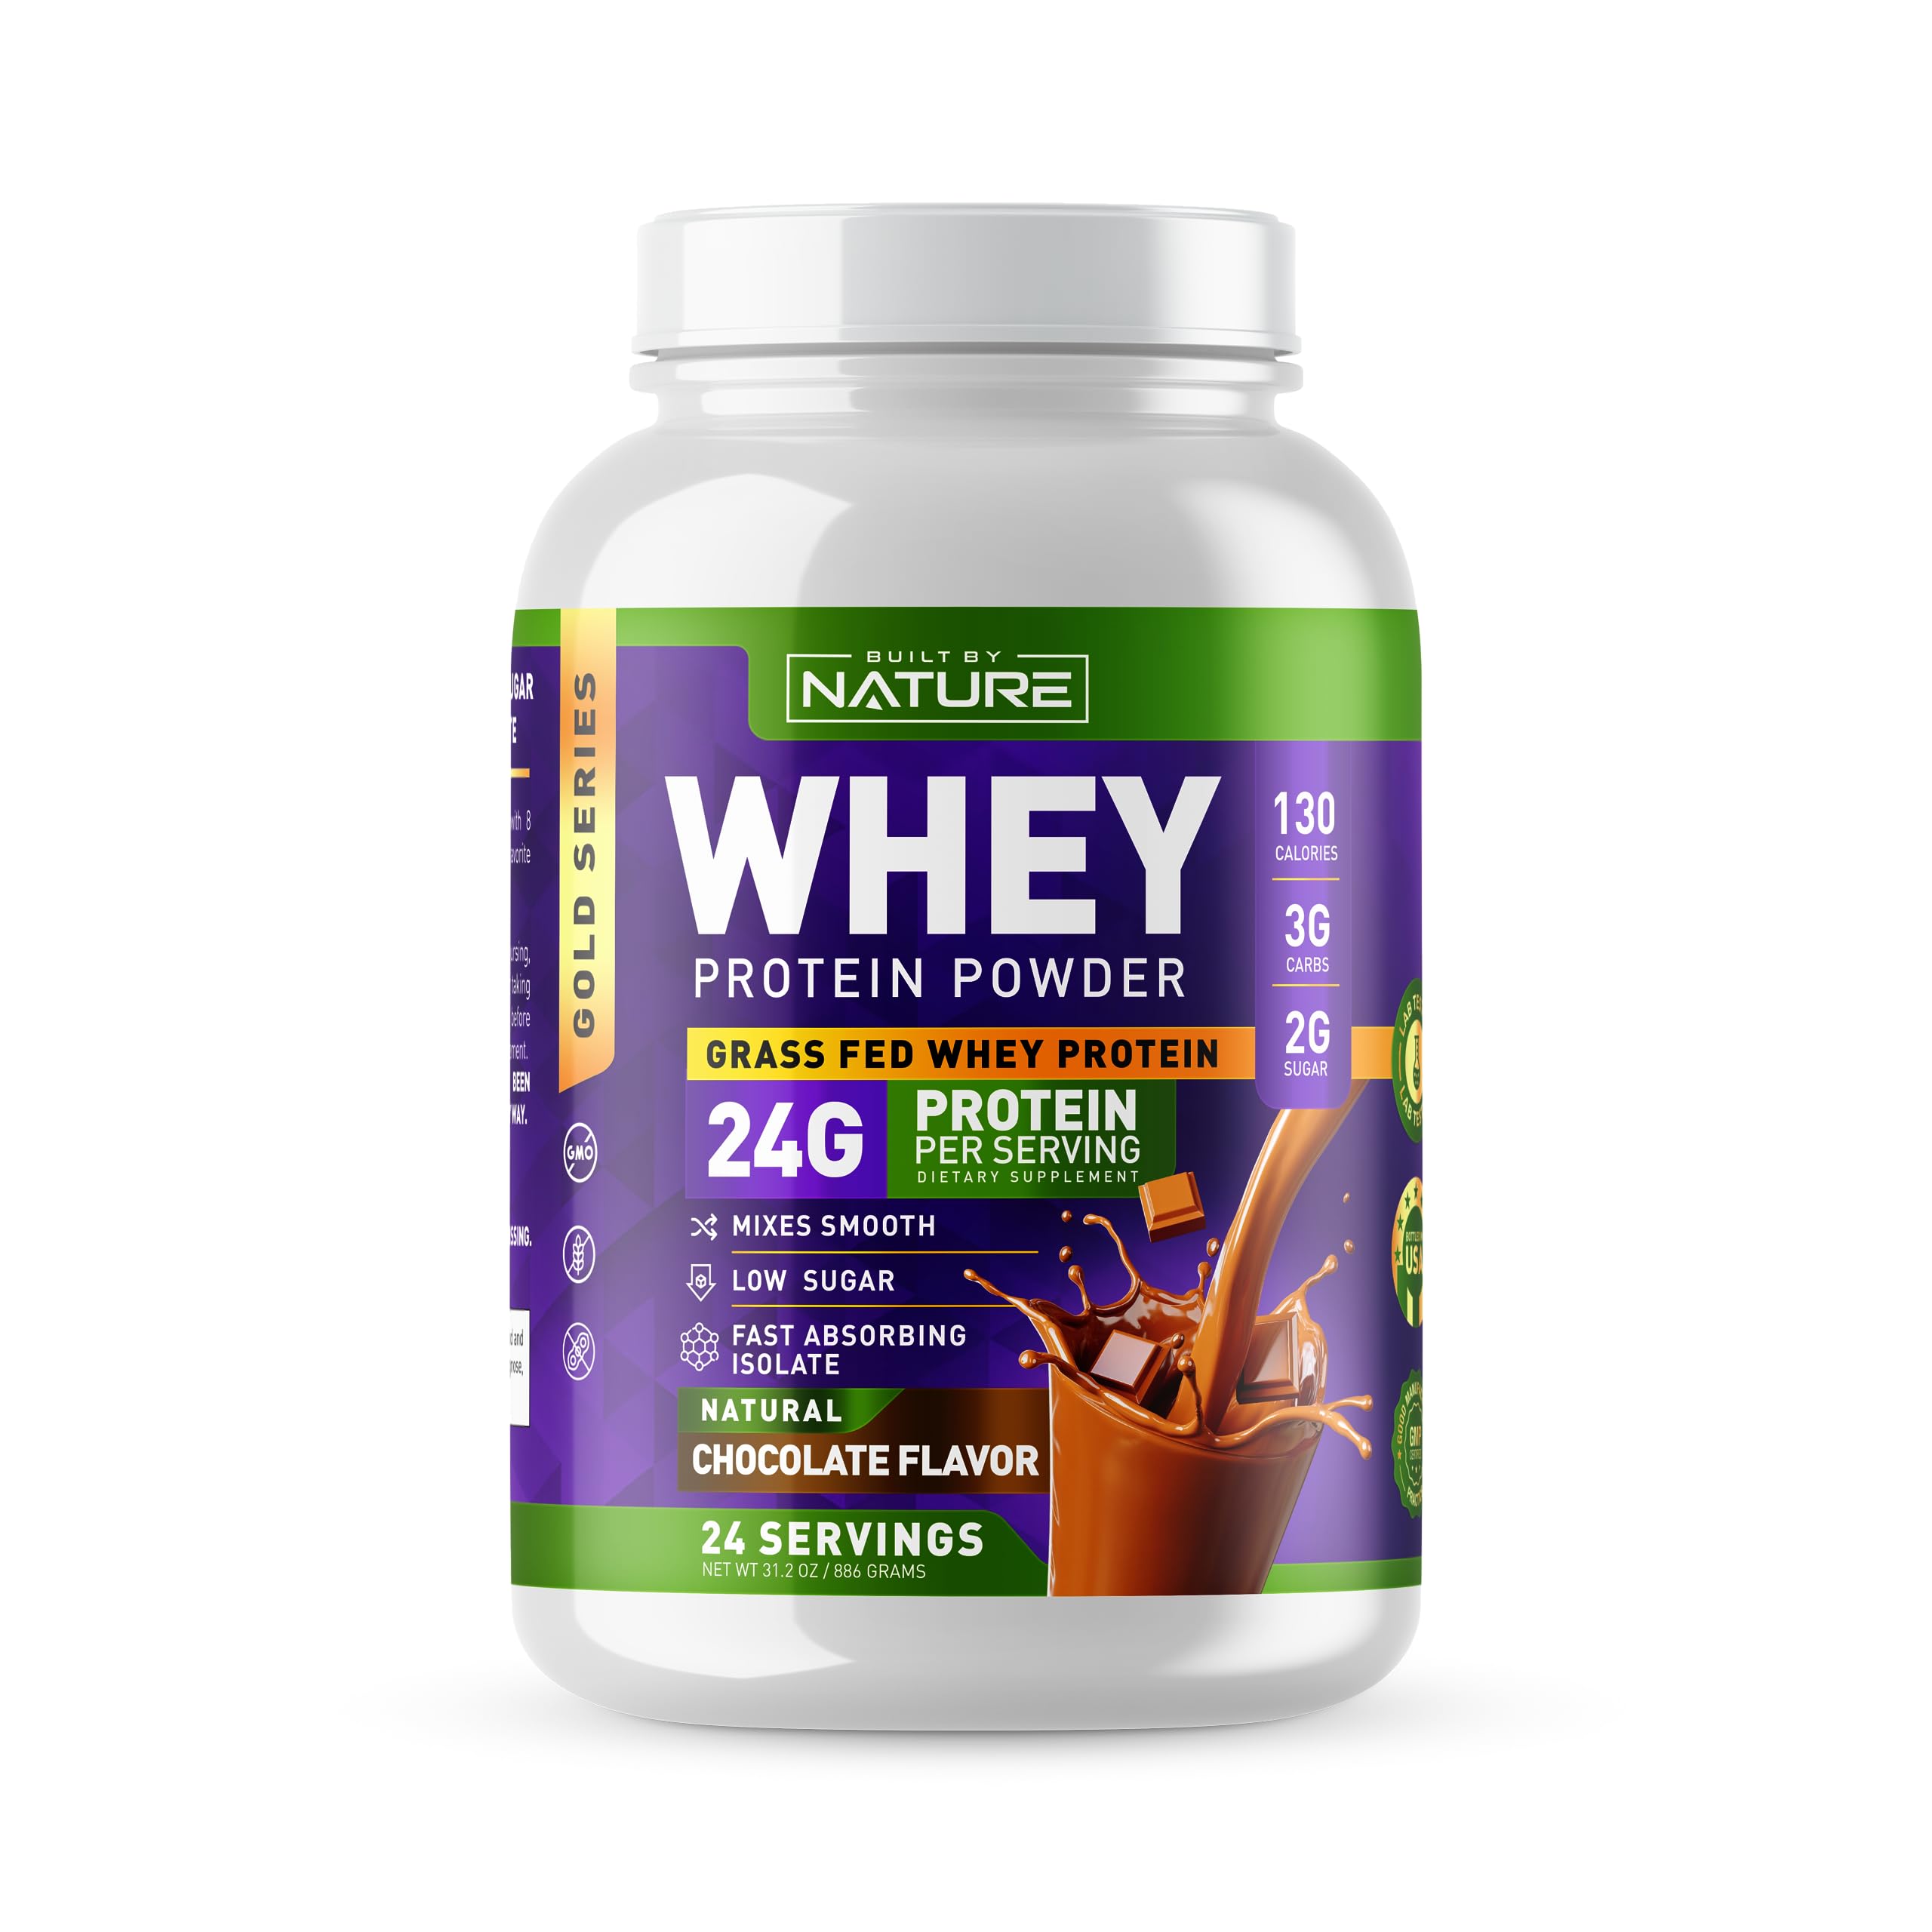 Built by Nature Whey Protein Powder - 100% Pure Whey Shake with Whey Isolate, Protein, No Bloating, Mixes Smooth, No Clumps or Chunks - High Protein, Low Sugar Drink